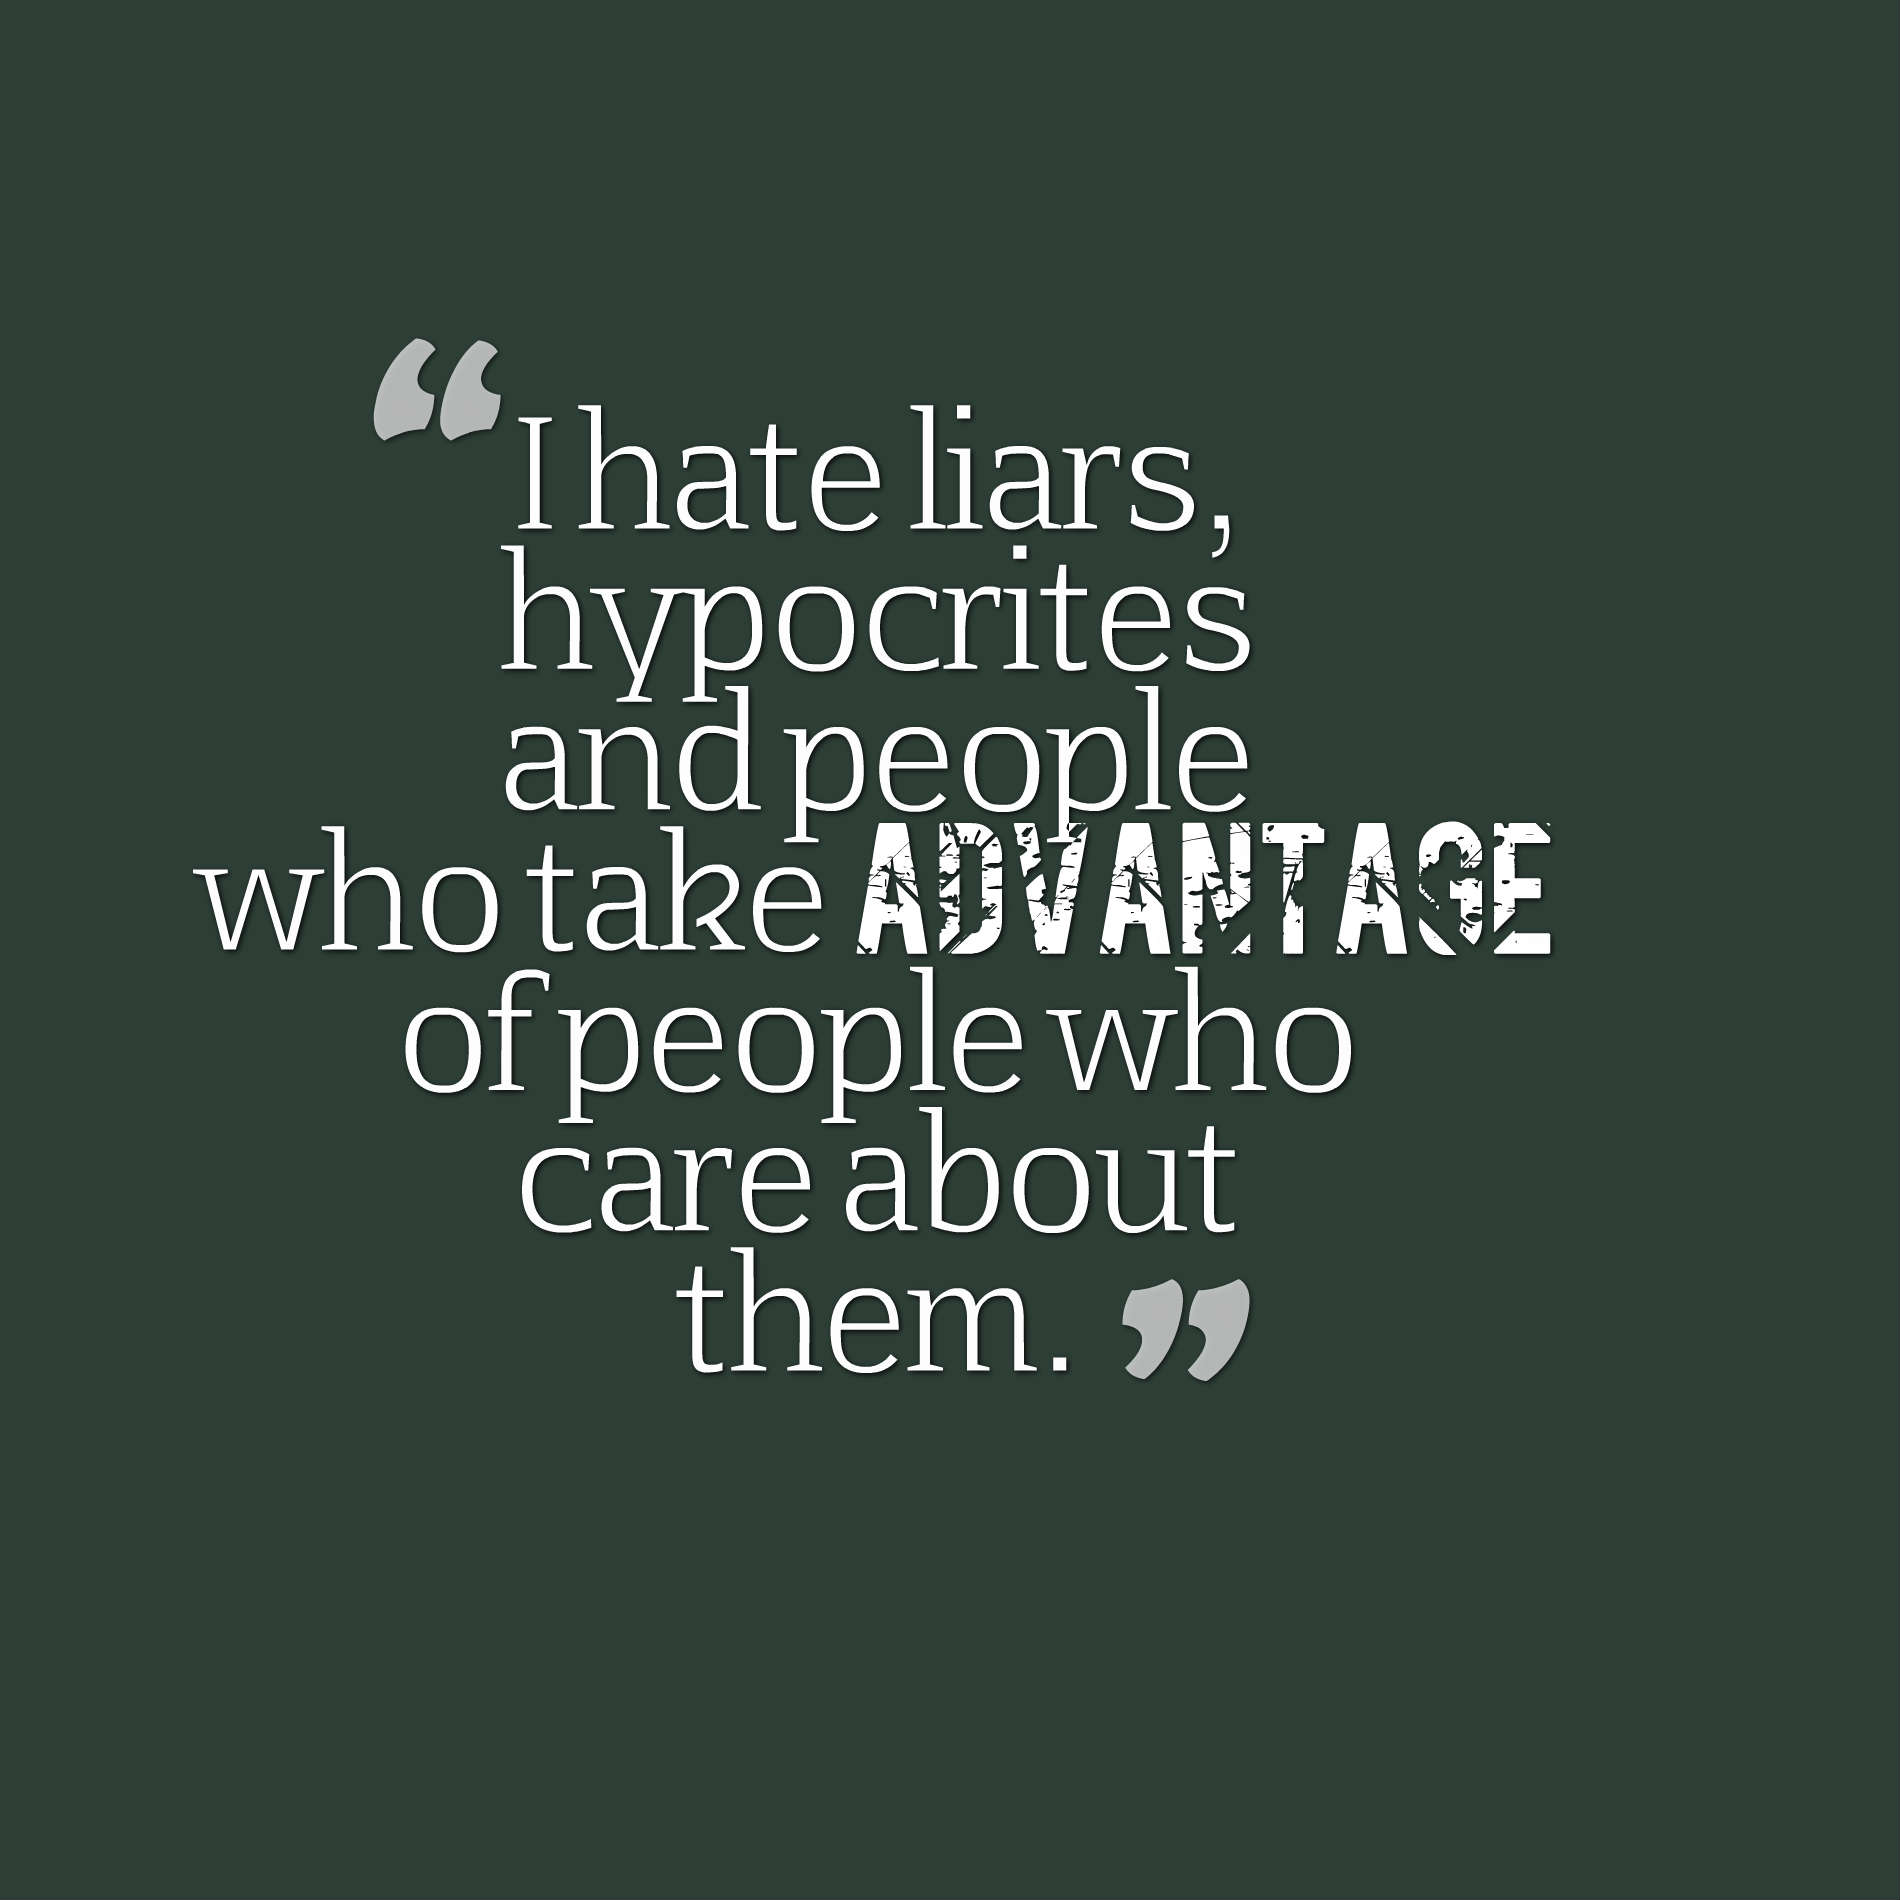 I hate liars, hypocrites and people who take advantage of people who care about them.